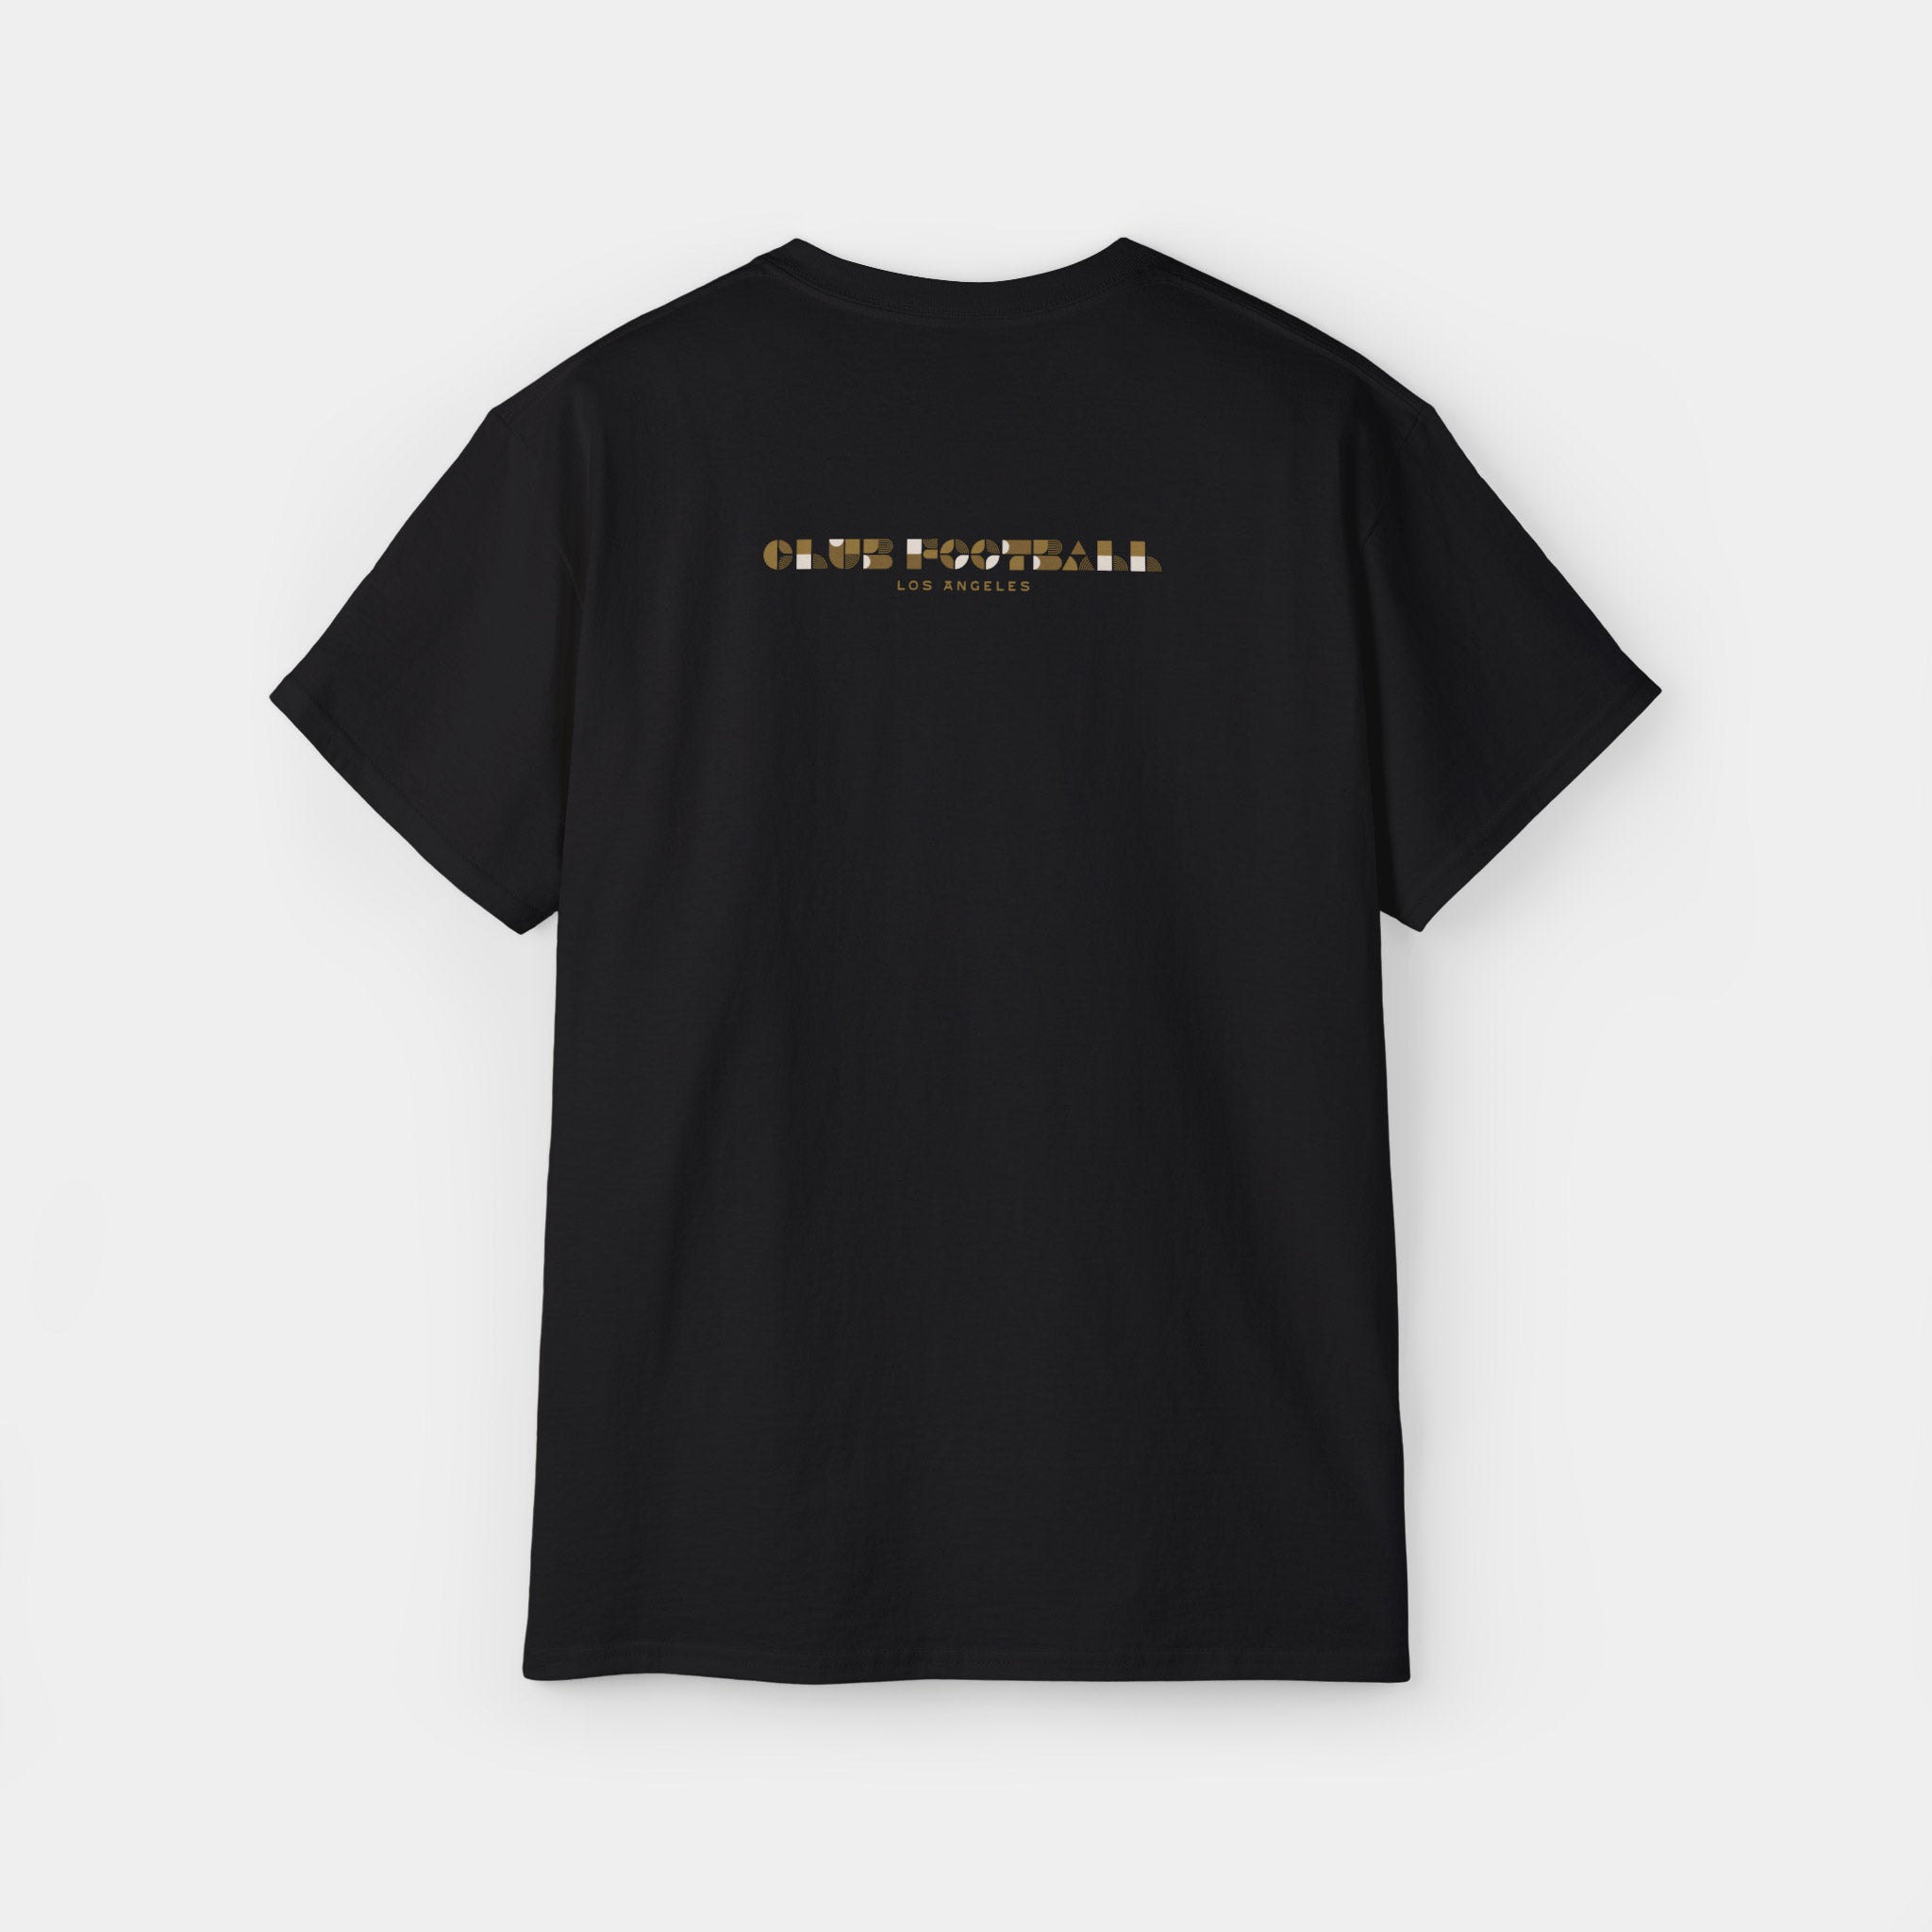 This Is Los Angeles (Wave 1B, LAFC) T-shirt